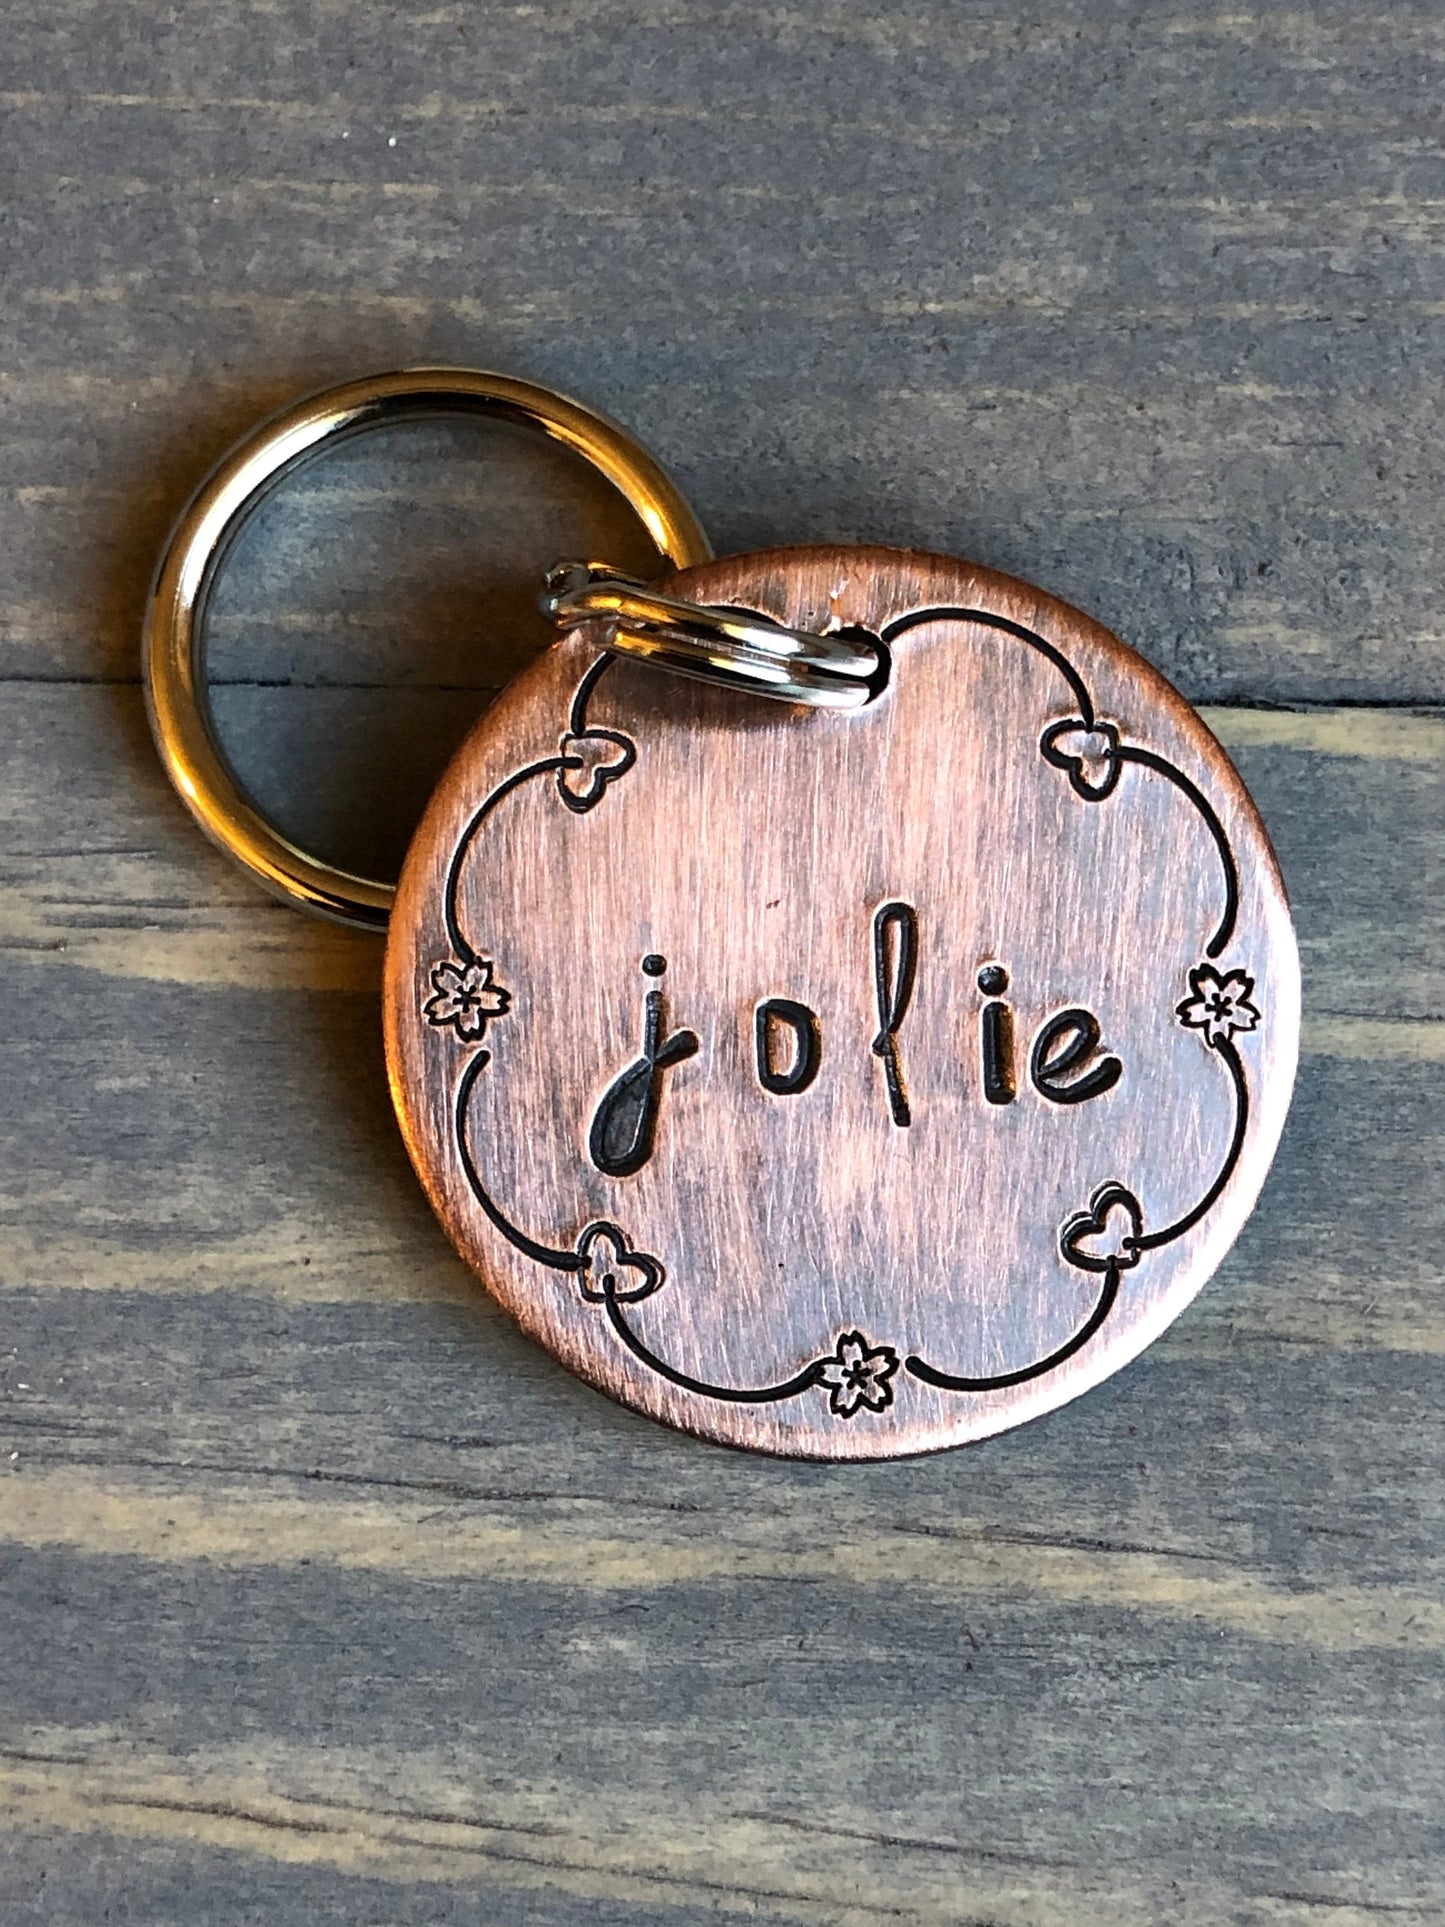 Custom Bordered Dog Tag, Hand Stamped Pet ID, Jolie, Personalized Dog Tag for Dog, Dog Tag with flower border